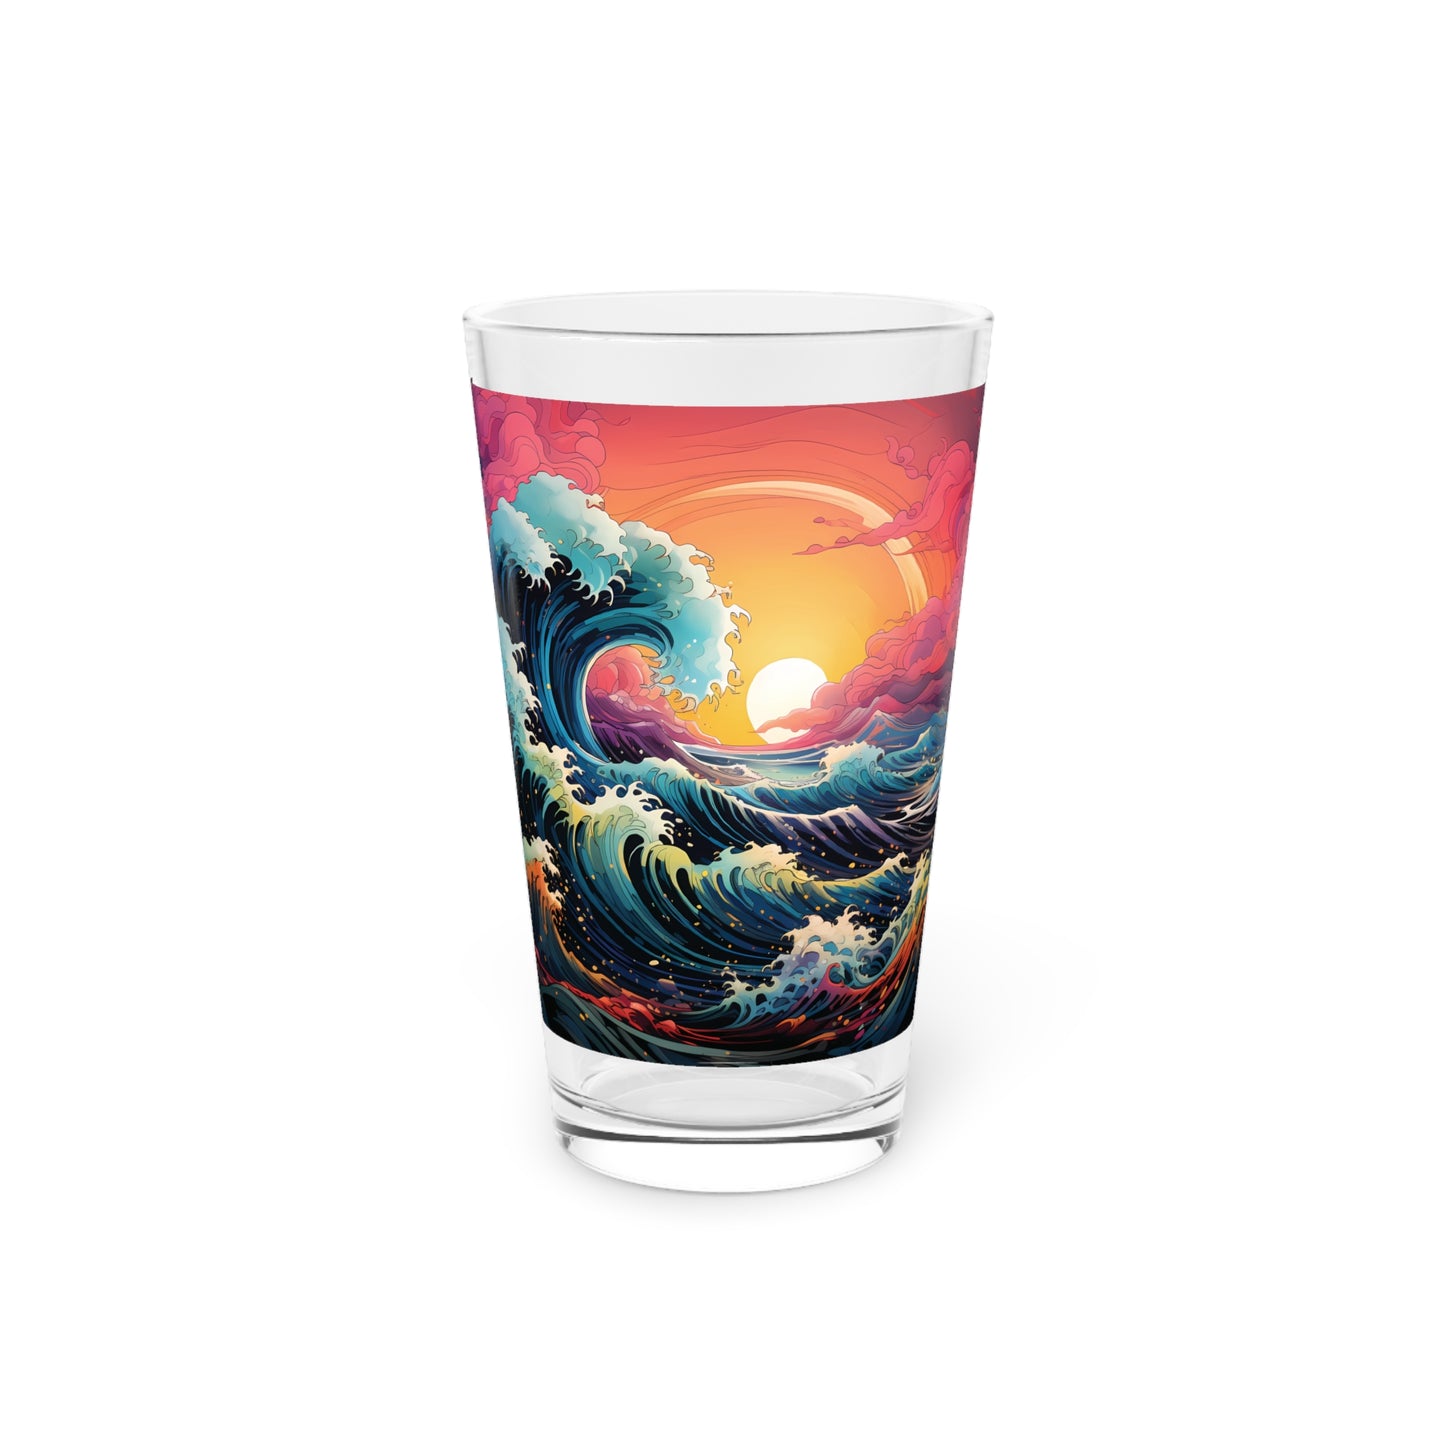 Dive into the rhythm of the ocean with our Colorful Waves Pint Glass, 16oz. Waves Design #010. Your drink, your waves, exclusively at Stashbox.ai.